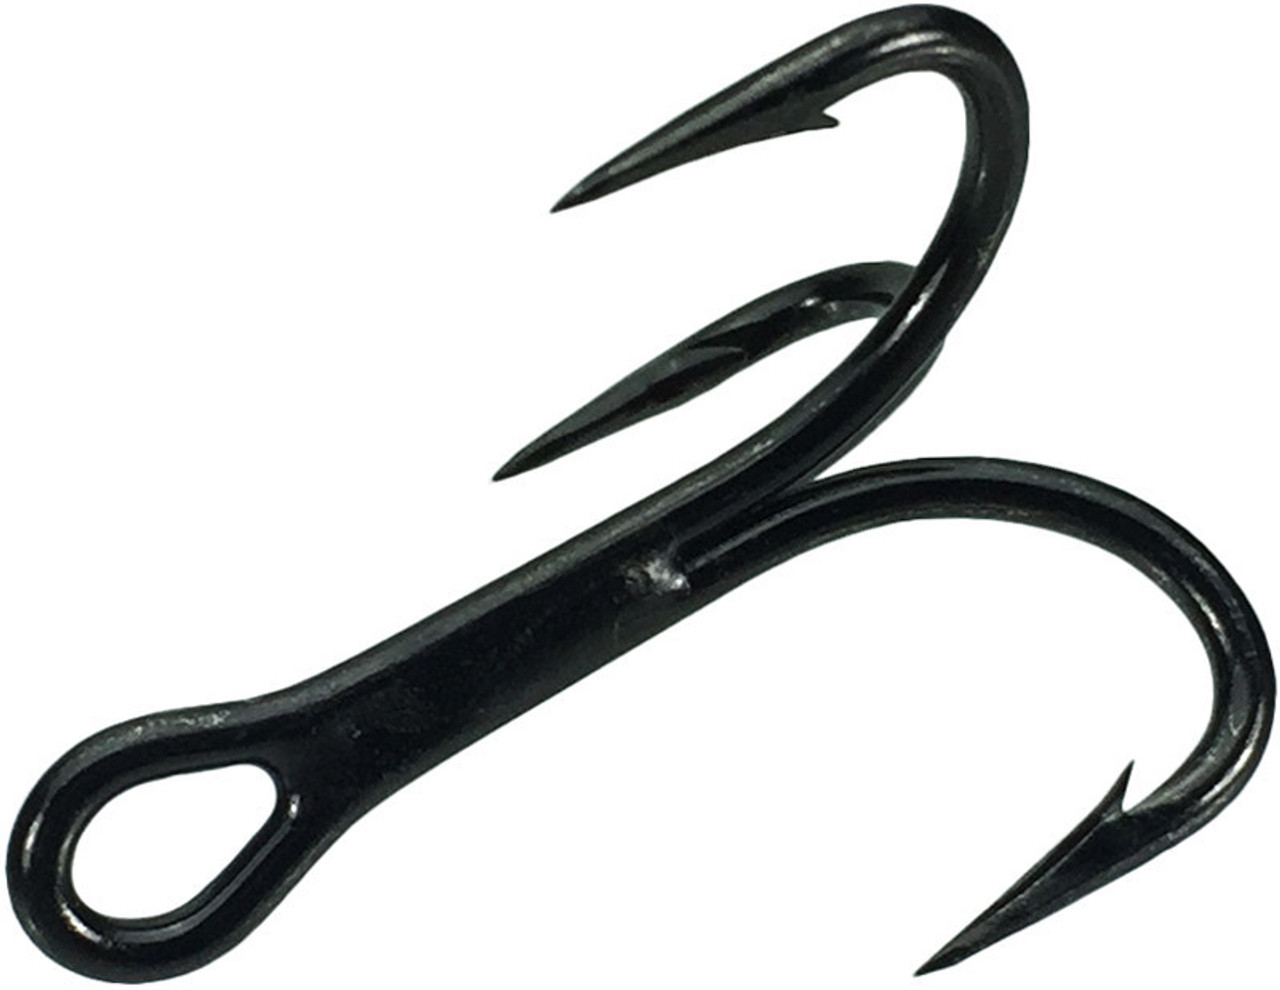 Singer 1 X 7 steel leader with two treble hooks size 2 load